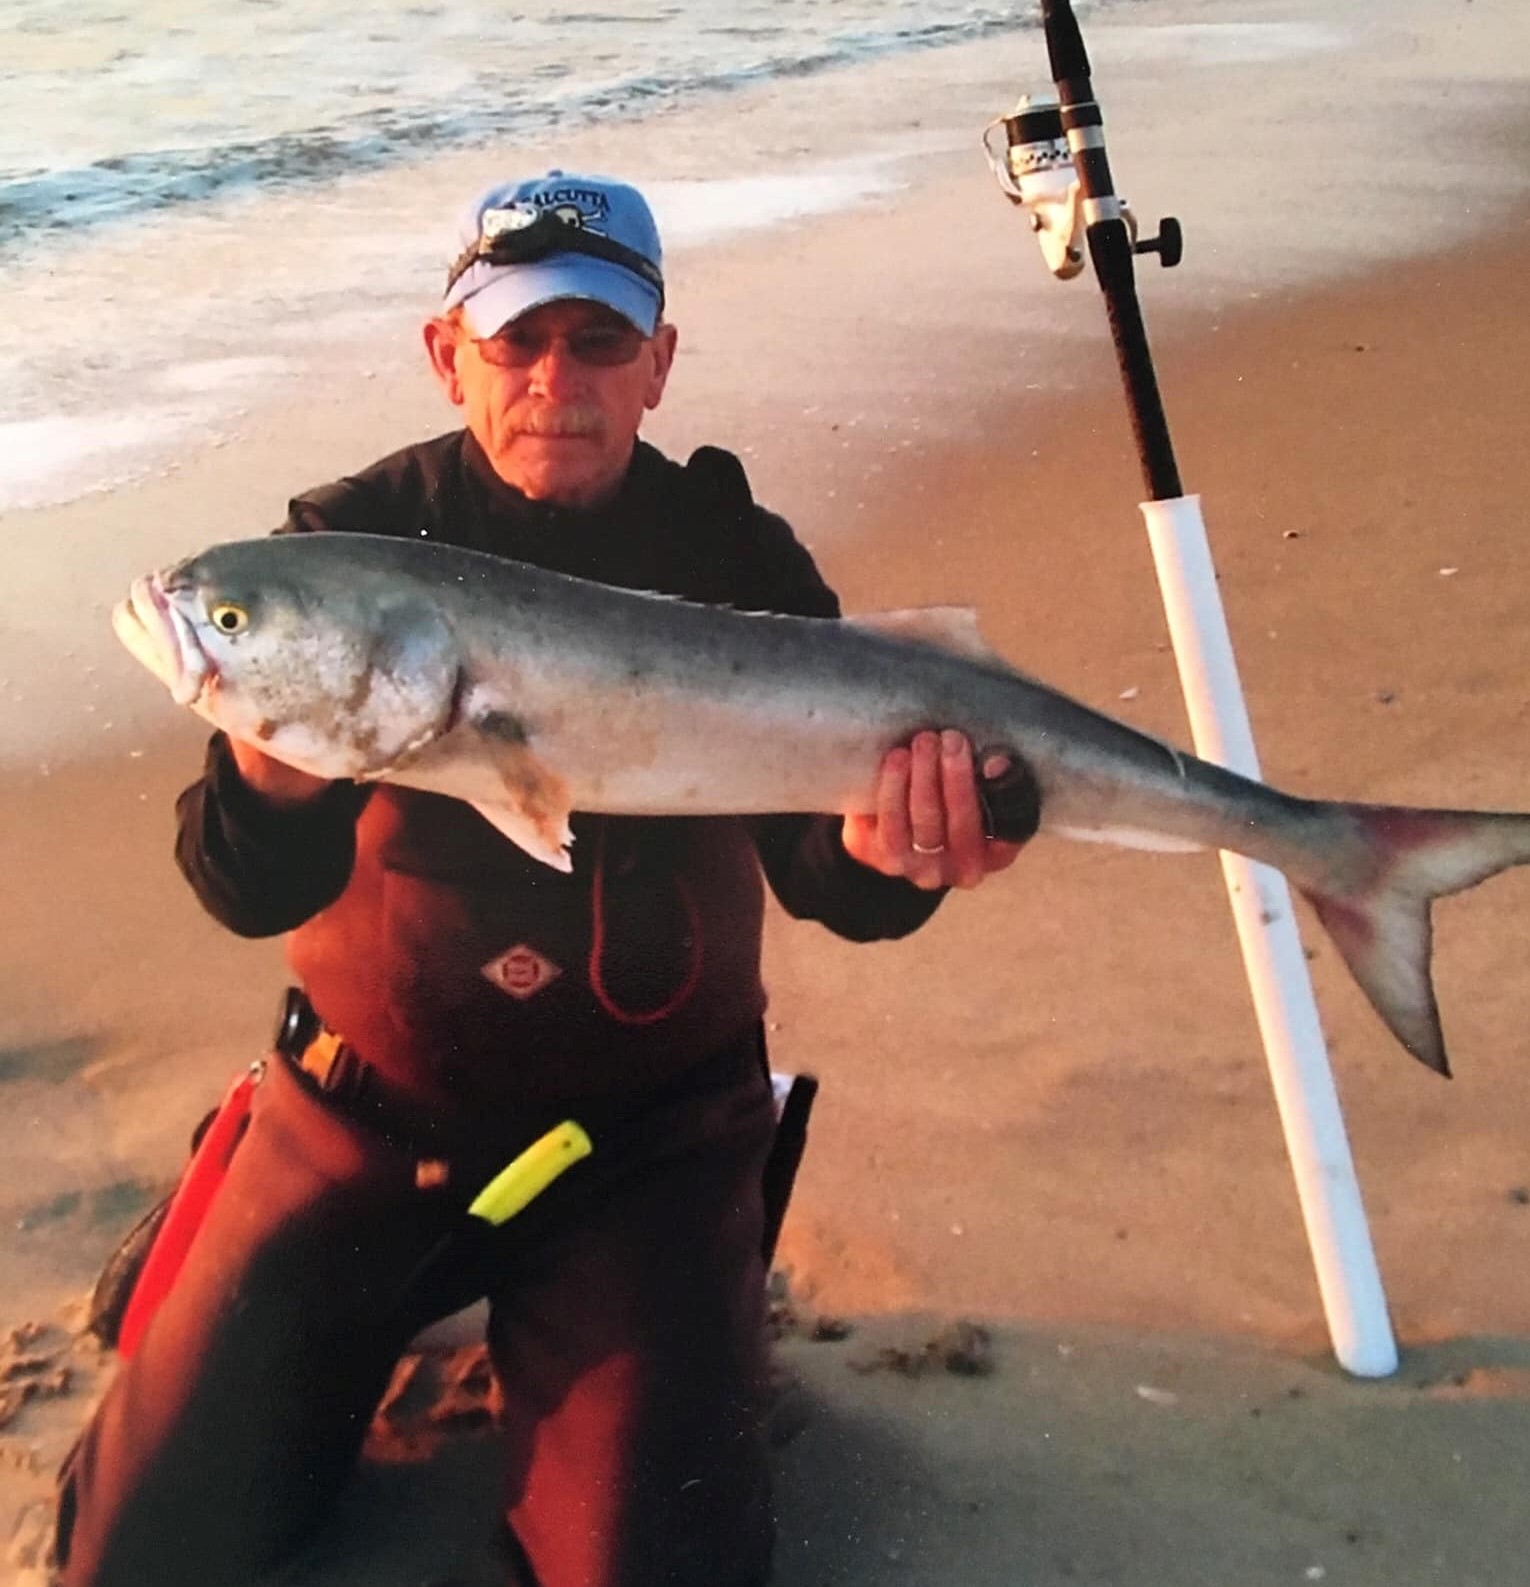 Beach Fishing with Soft Plastics 4 highly effective Types for Catching More  Fish - The Beach Angler